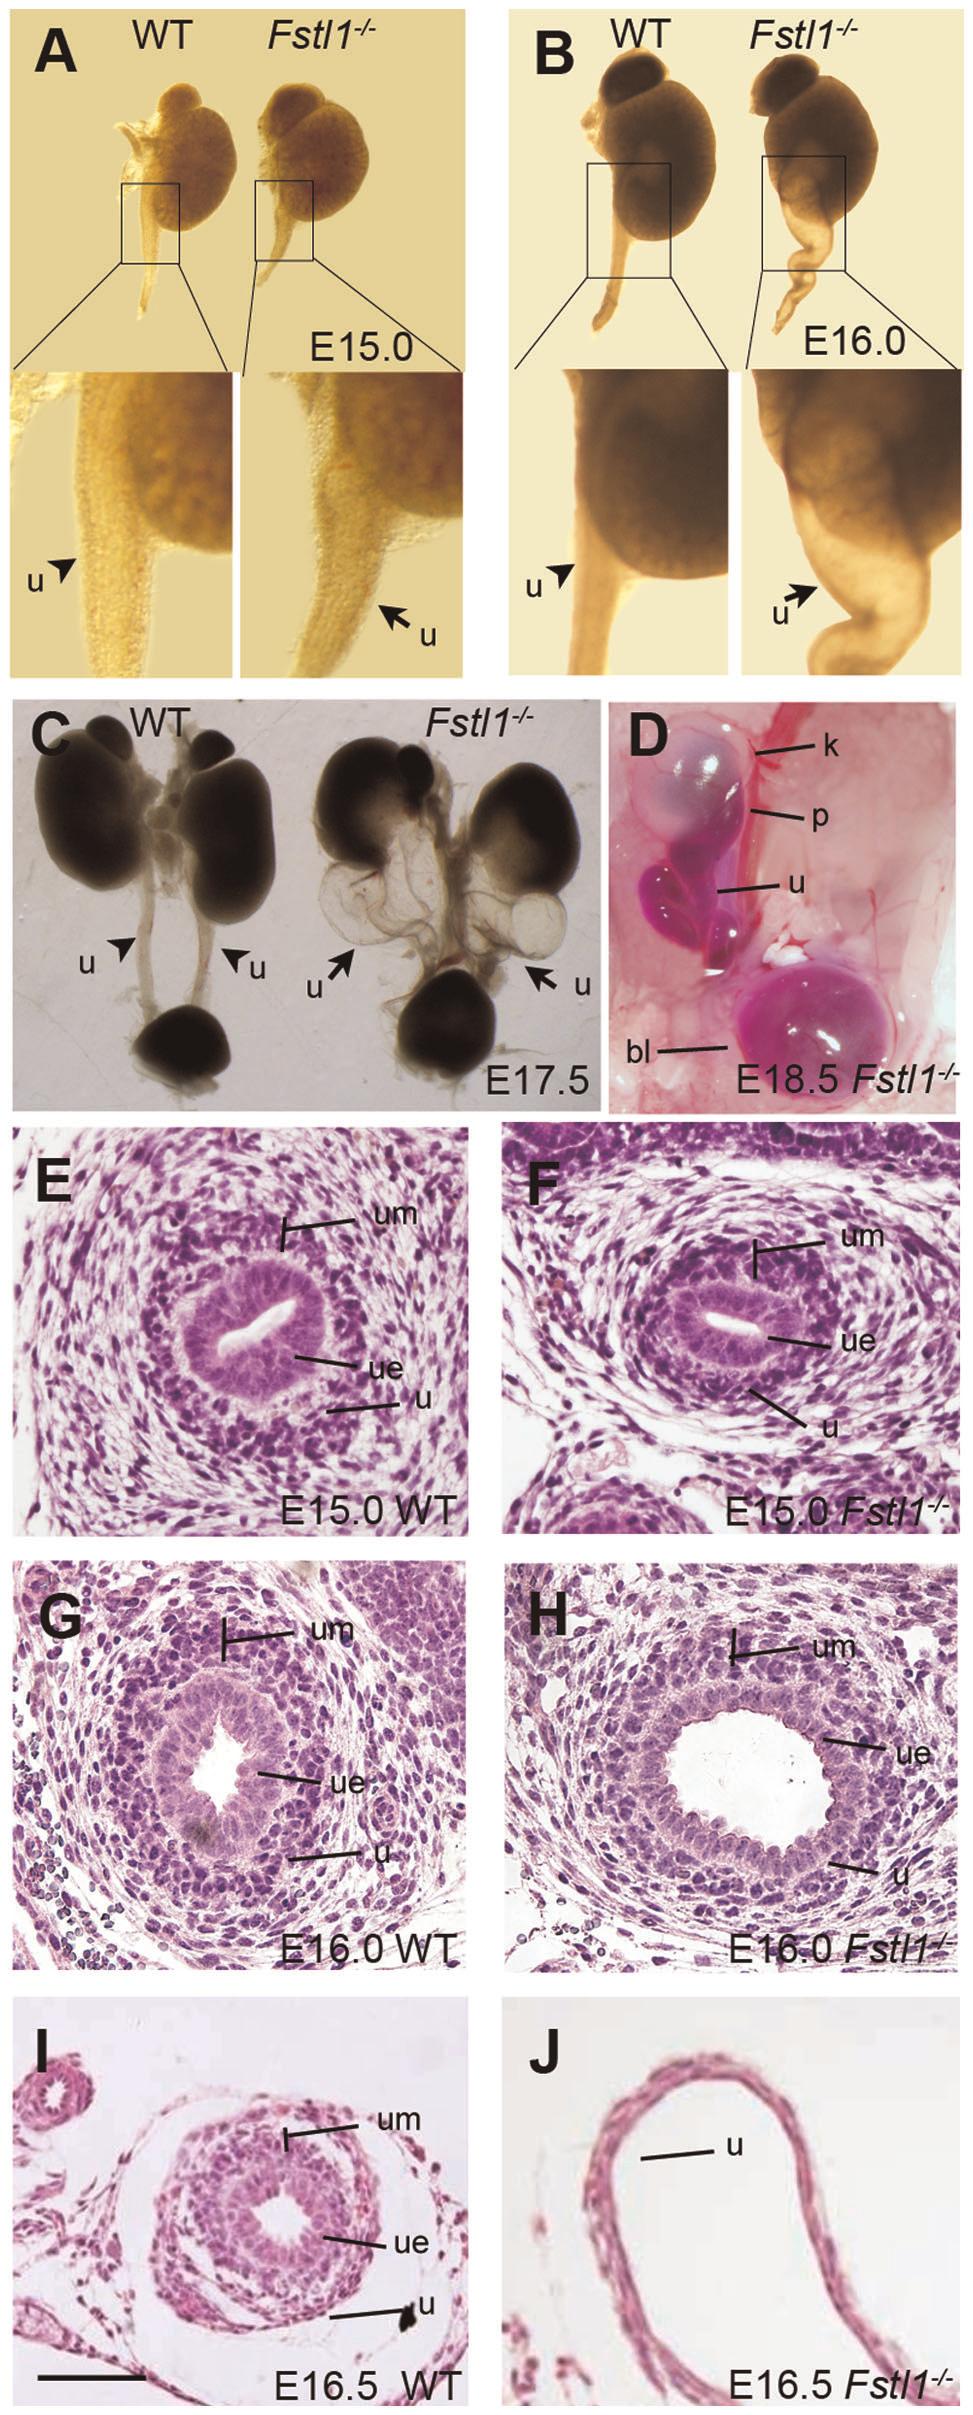 5 (D), E16.5 (E) and E17.5 (F). Note that Fstl1 immunostaining was observed in the mesenchyme (um) as well as the ureteric epithelium (ue) from E15.5 to E17.5 (C-F). Scale bars: 40 mm.